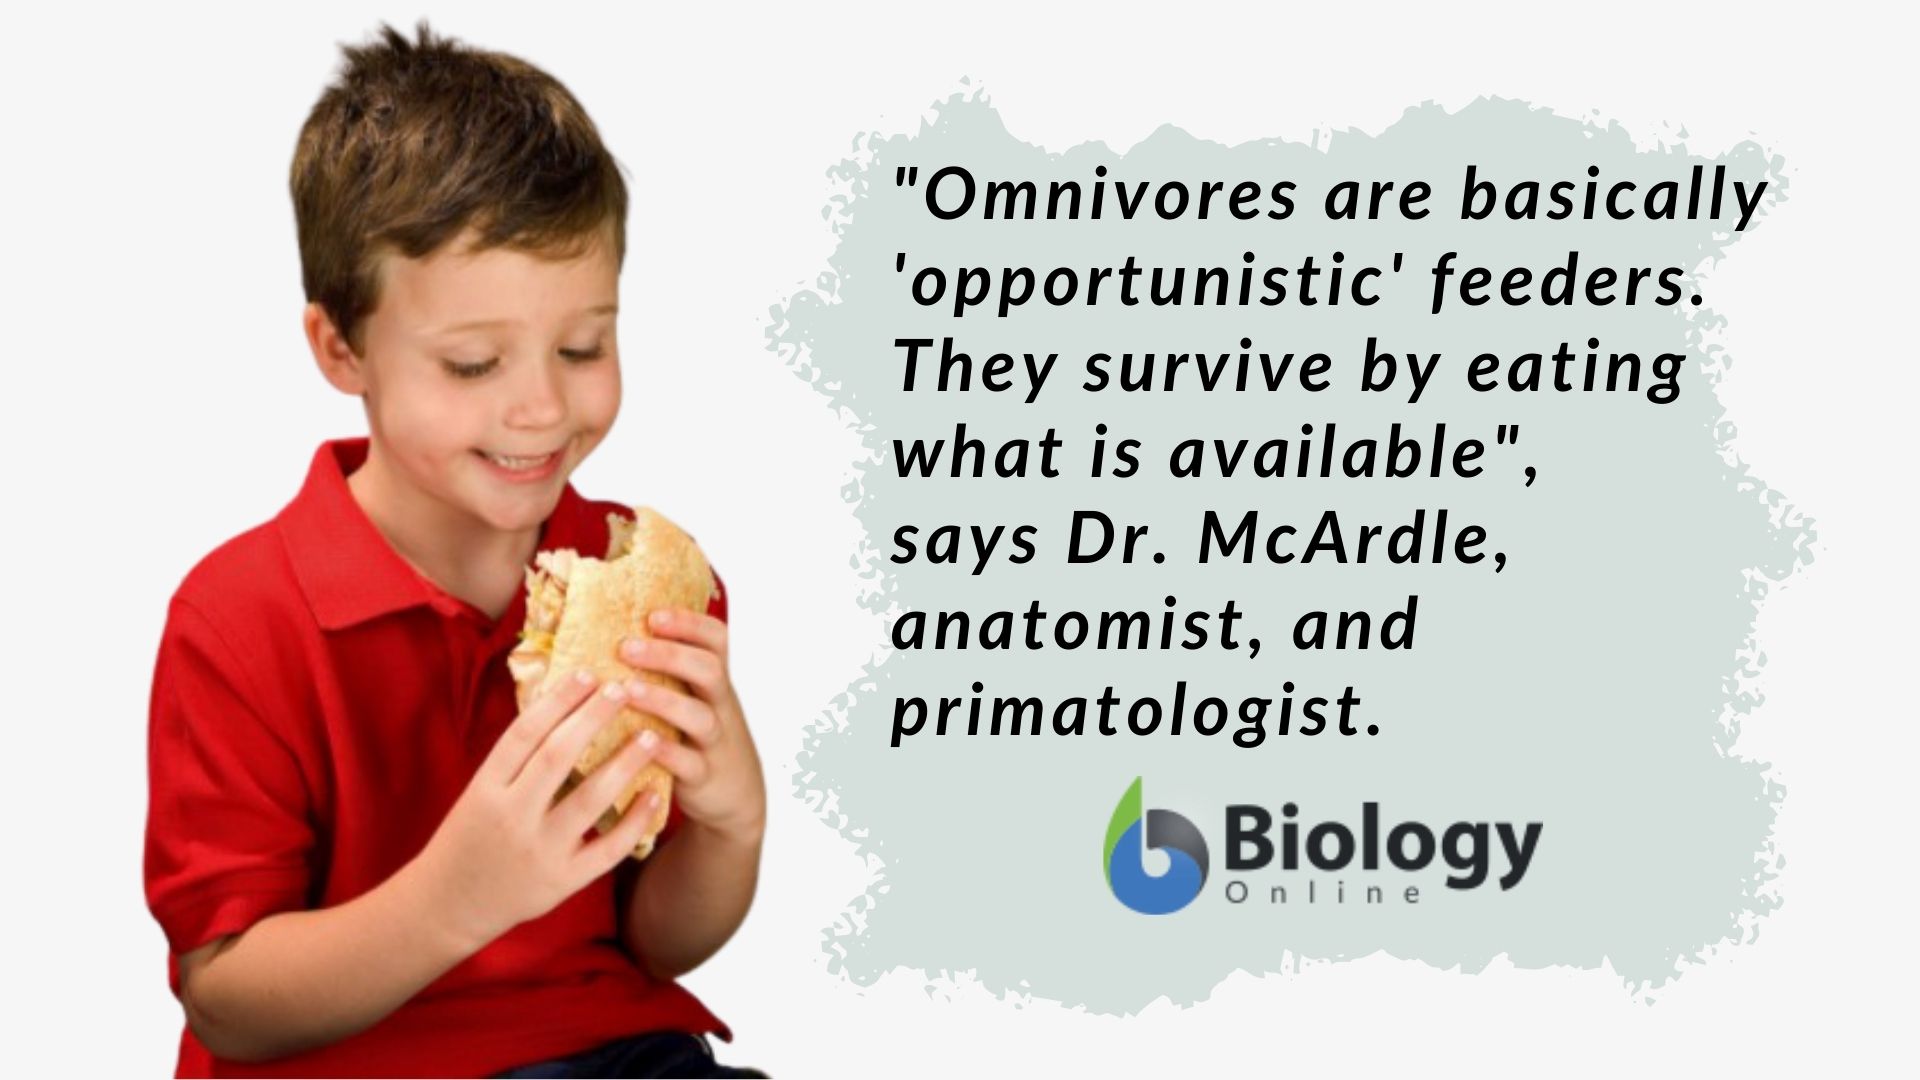 Humans are Omnivores - Evidence - Biology Online Archive Article